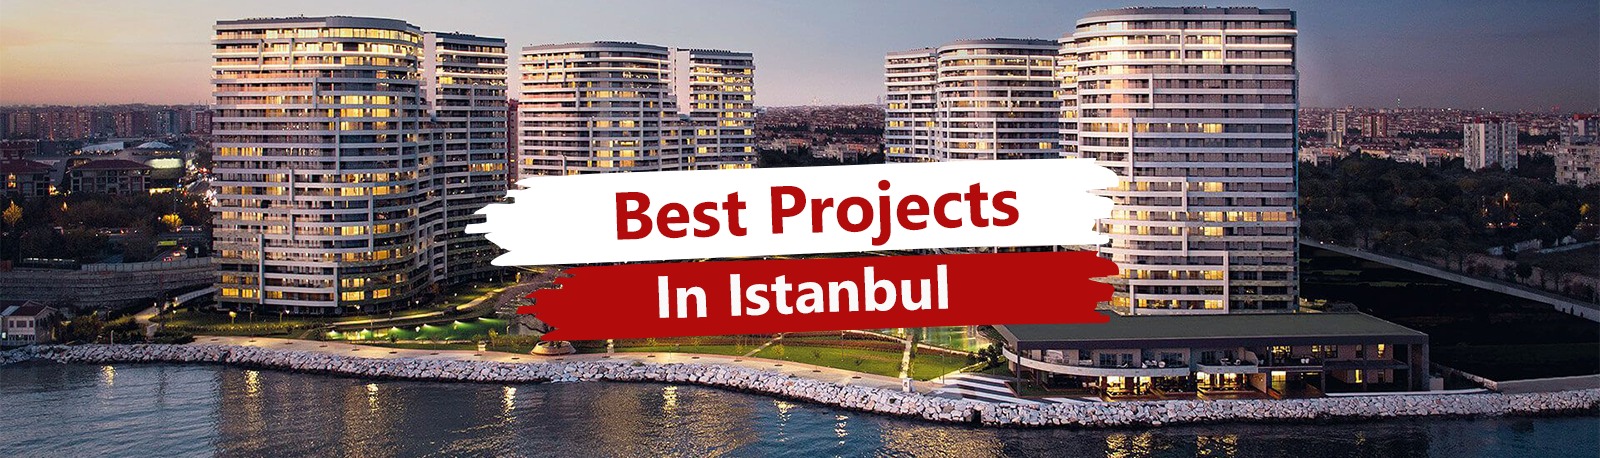 Best Projects In Istanbul